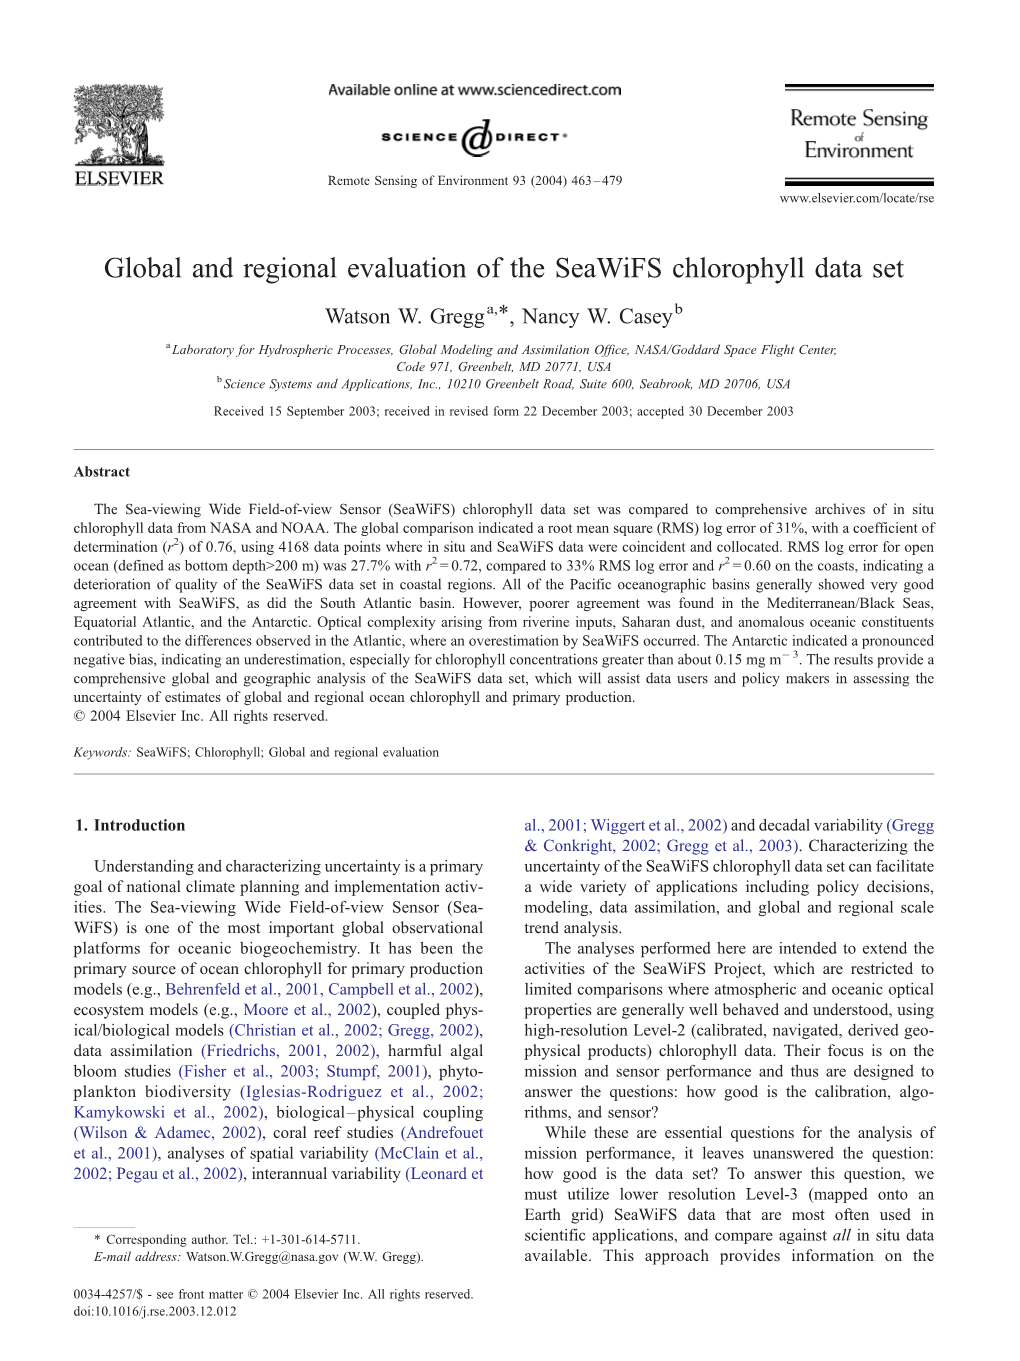 Global and Regional Evaluation of the Seawifs Chlorophyll Data Set